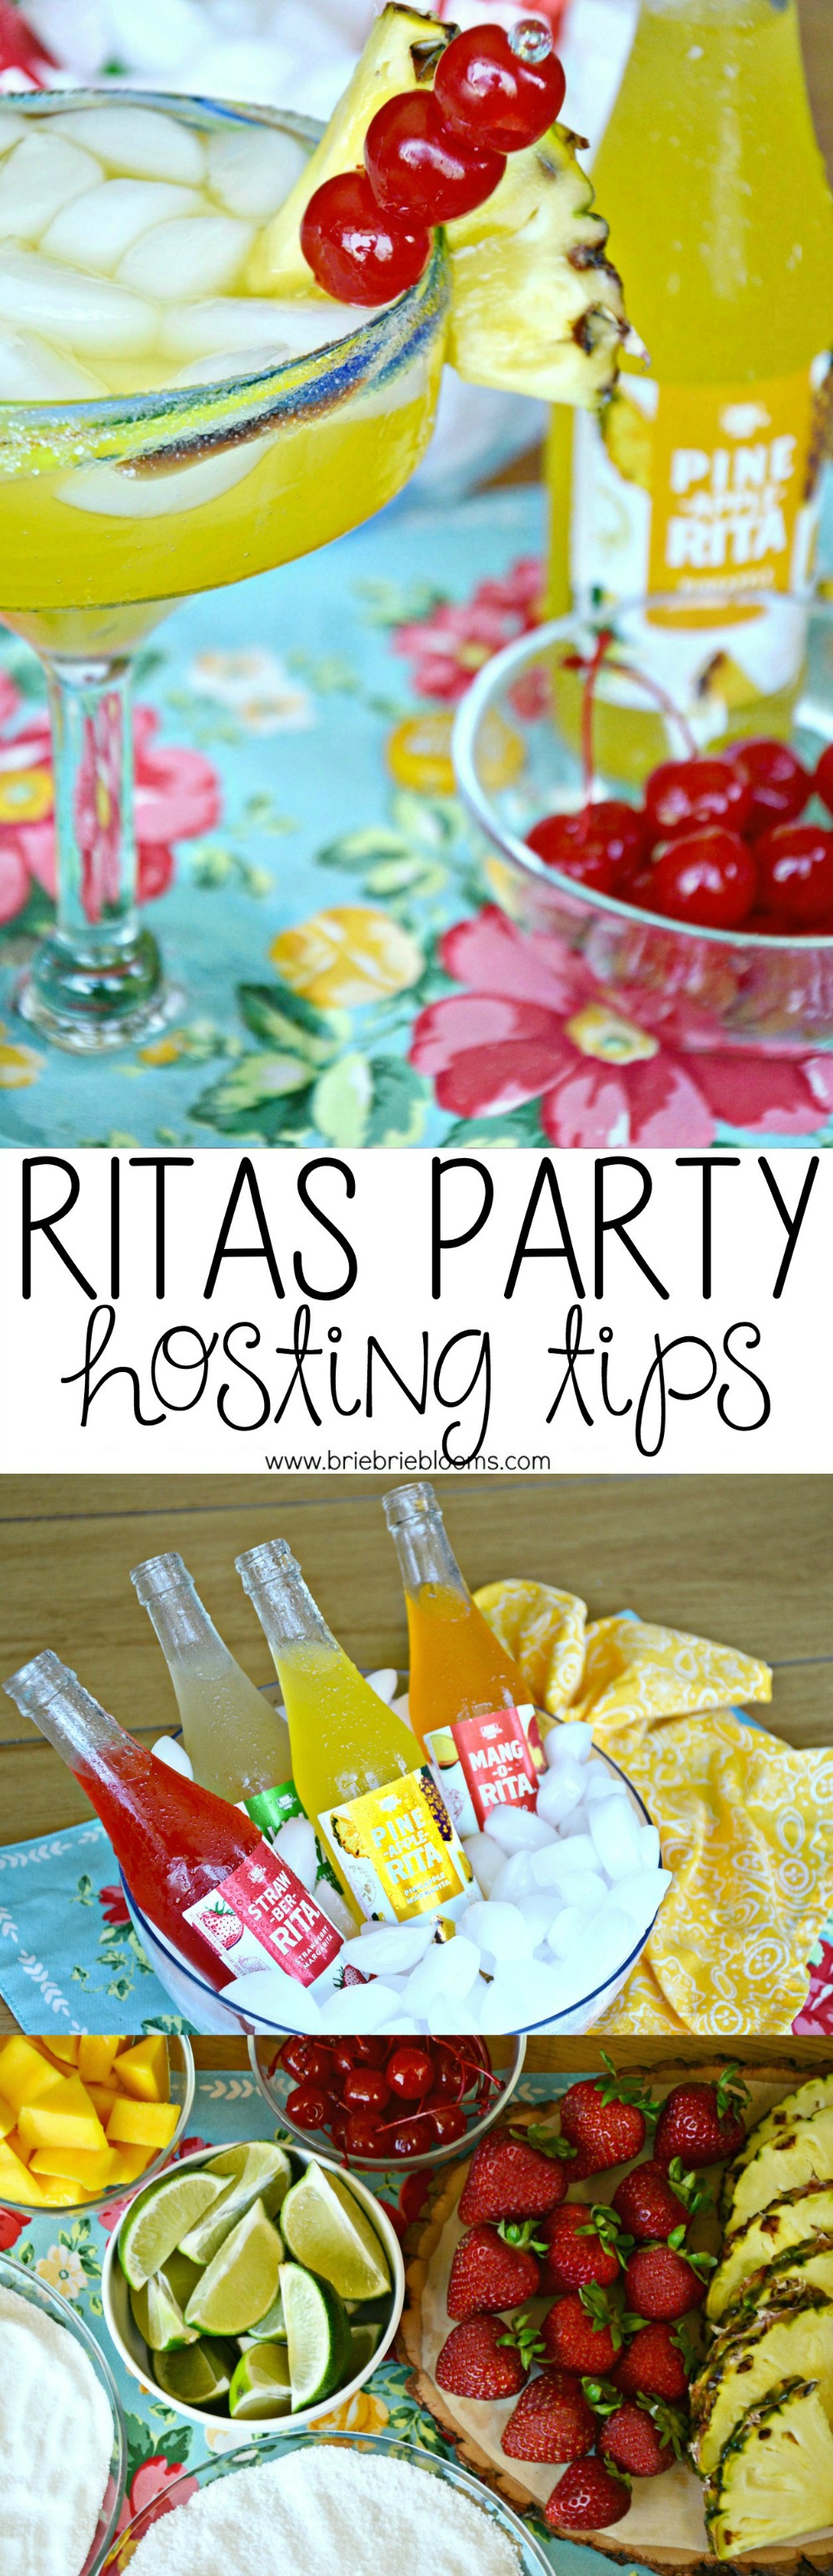 It's easy to host a margarita party when you have the right supplies. The RITAS party pack is full of flavors your guests will love!